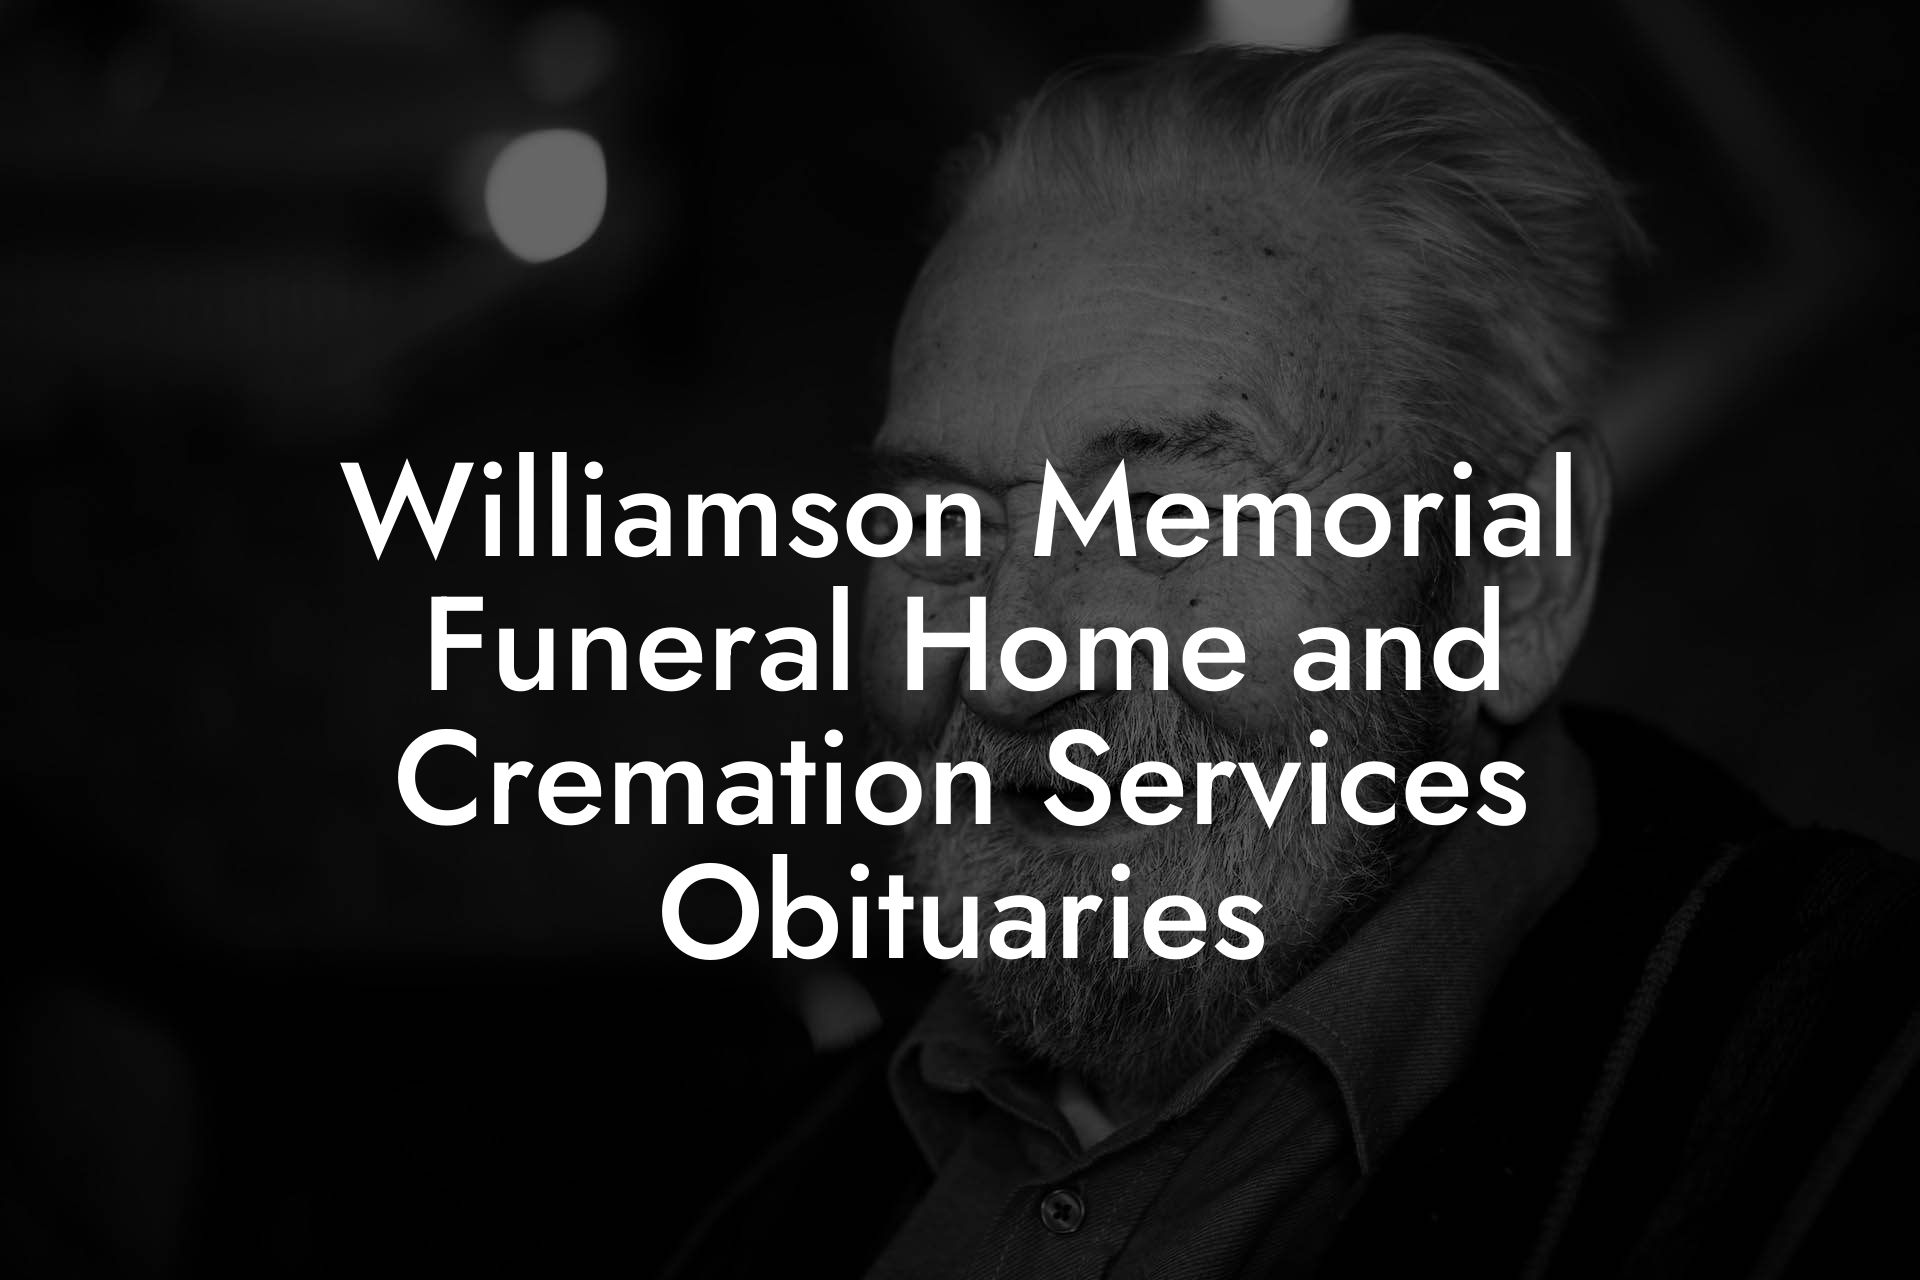 Williamson Memorial Funeral Home and Cremation Services Obituaries